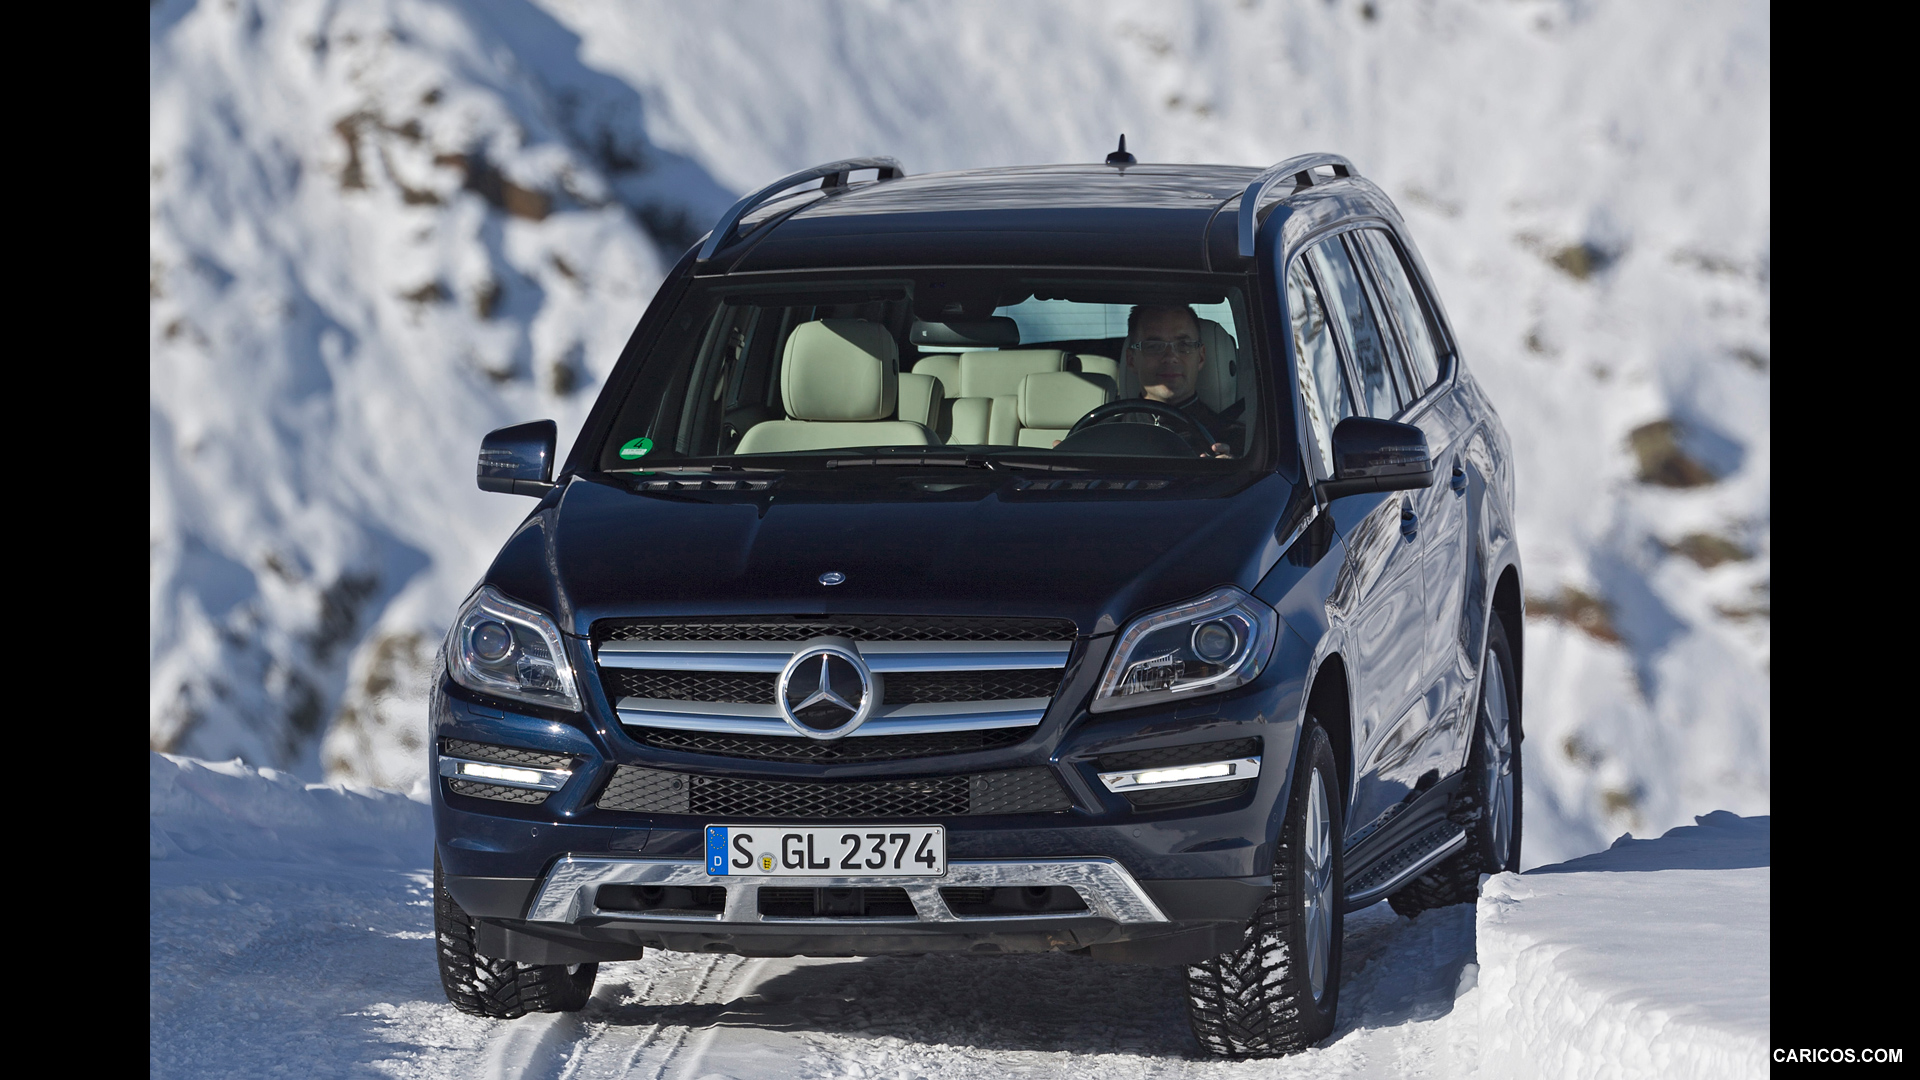 2013 Mercedes-Benz GL 500 4MATIC on Snow - Front, #237 of 259